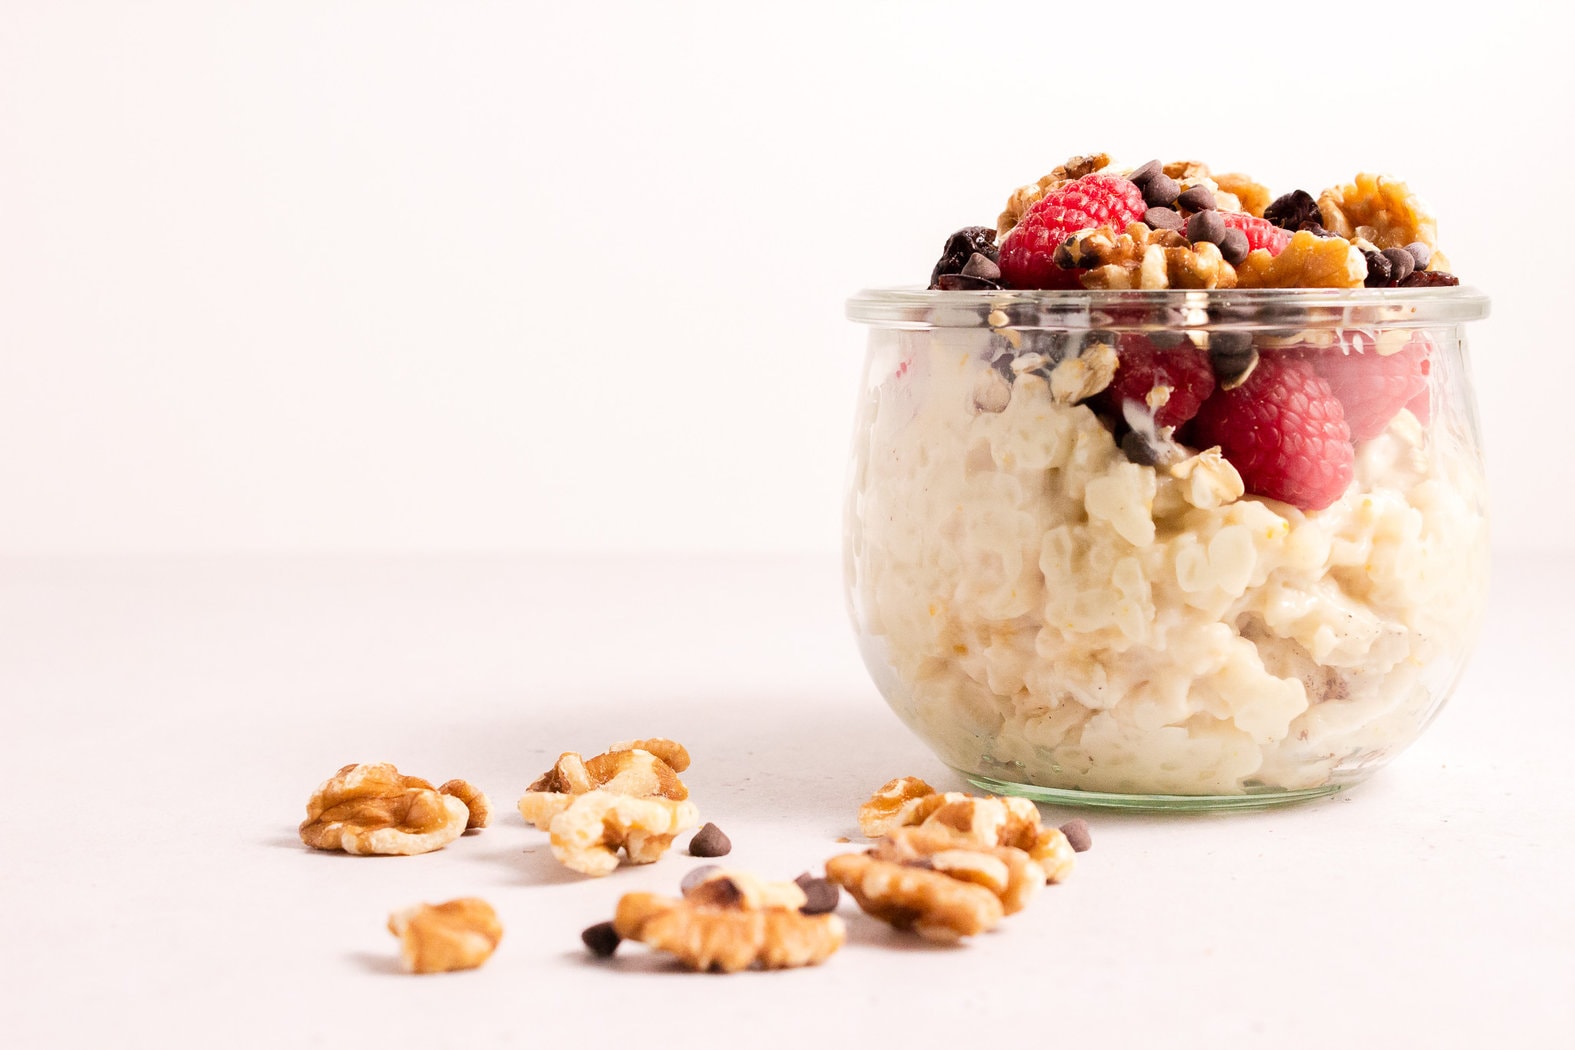 Glass bowl filled with rice pudding and fruit next to some walnuts